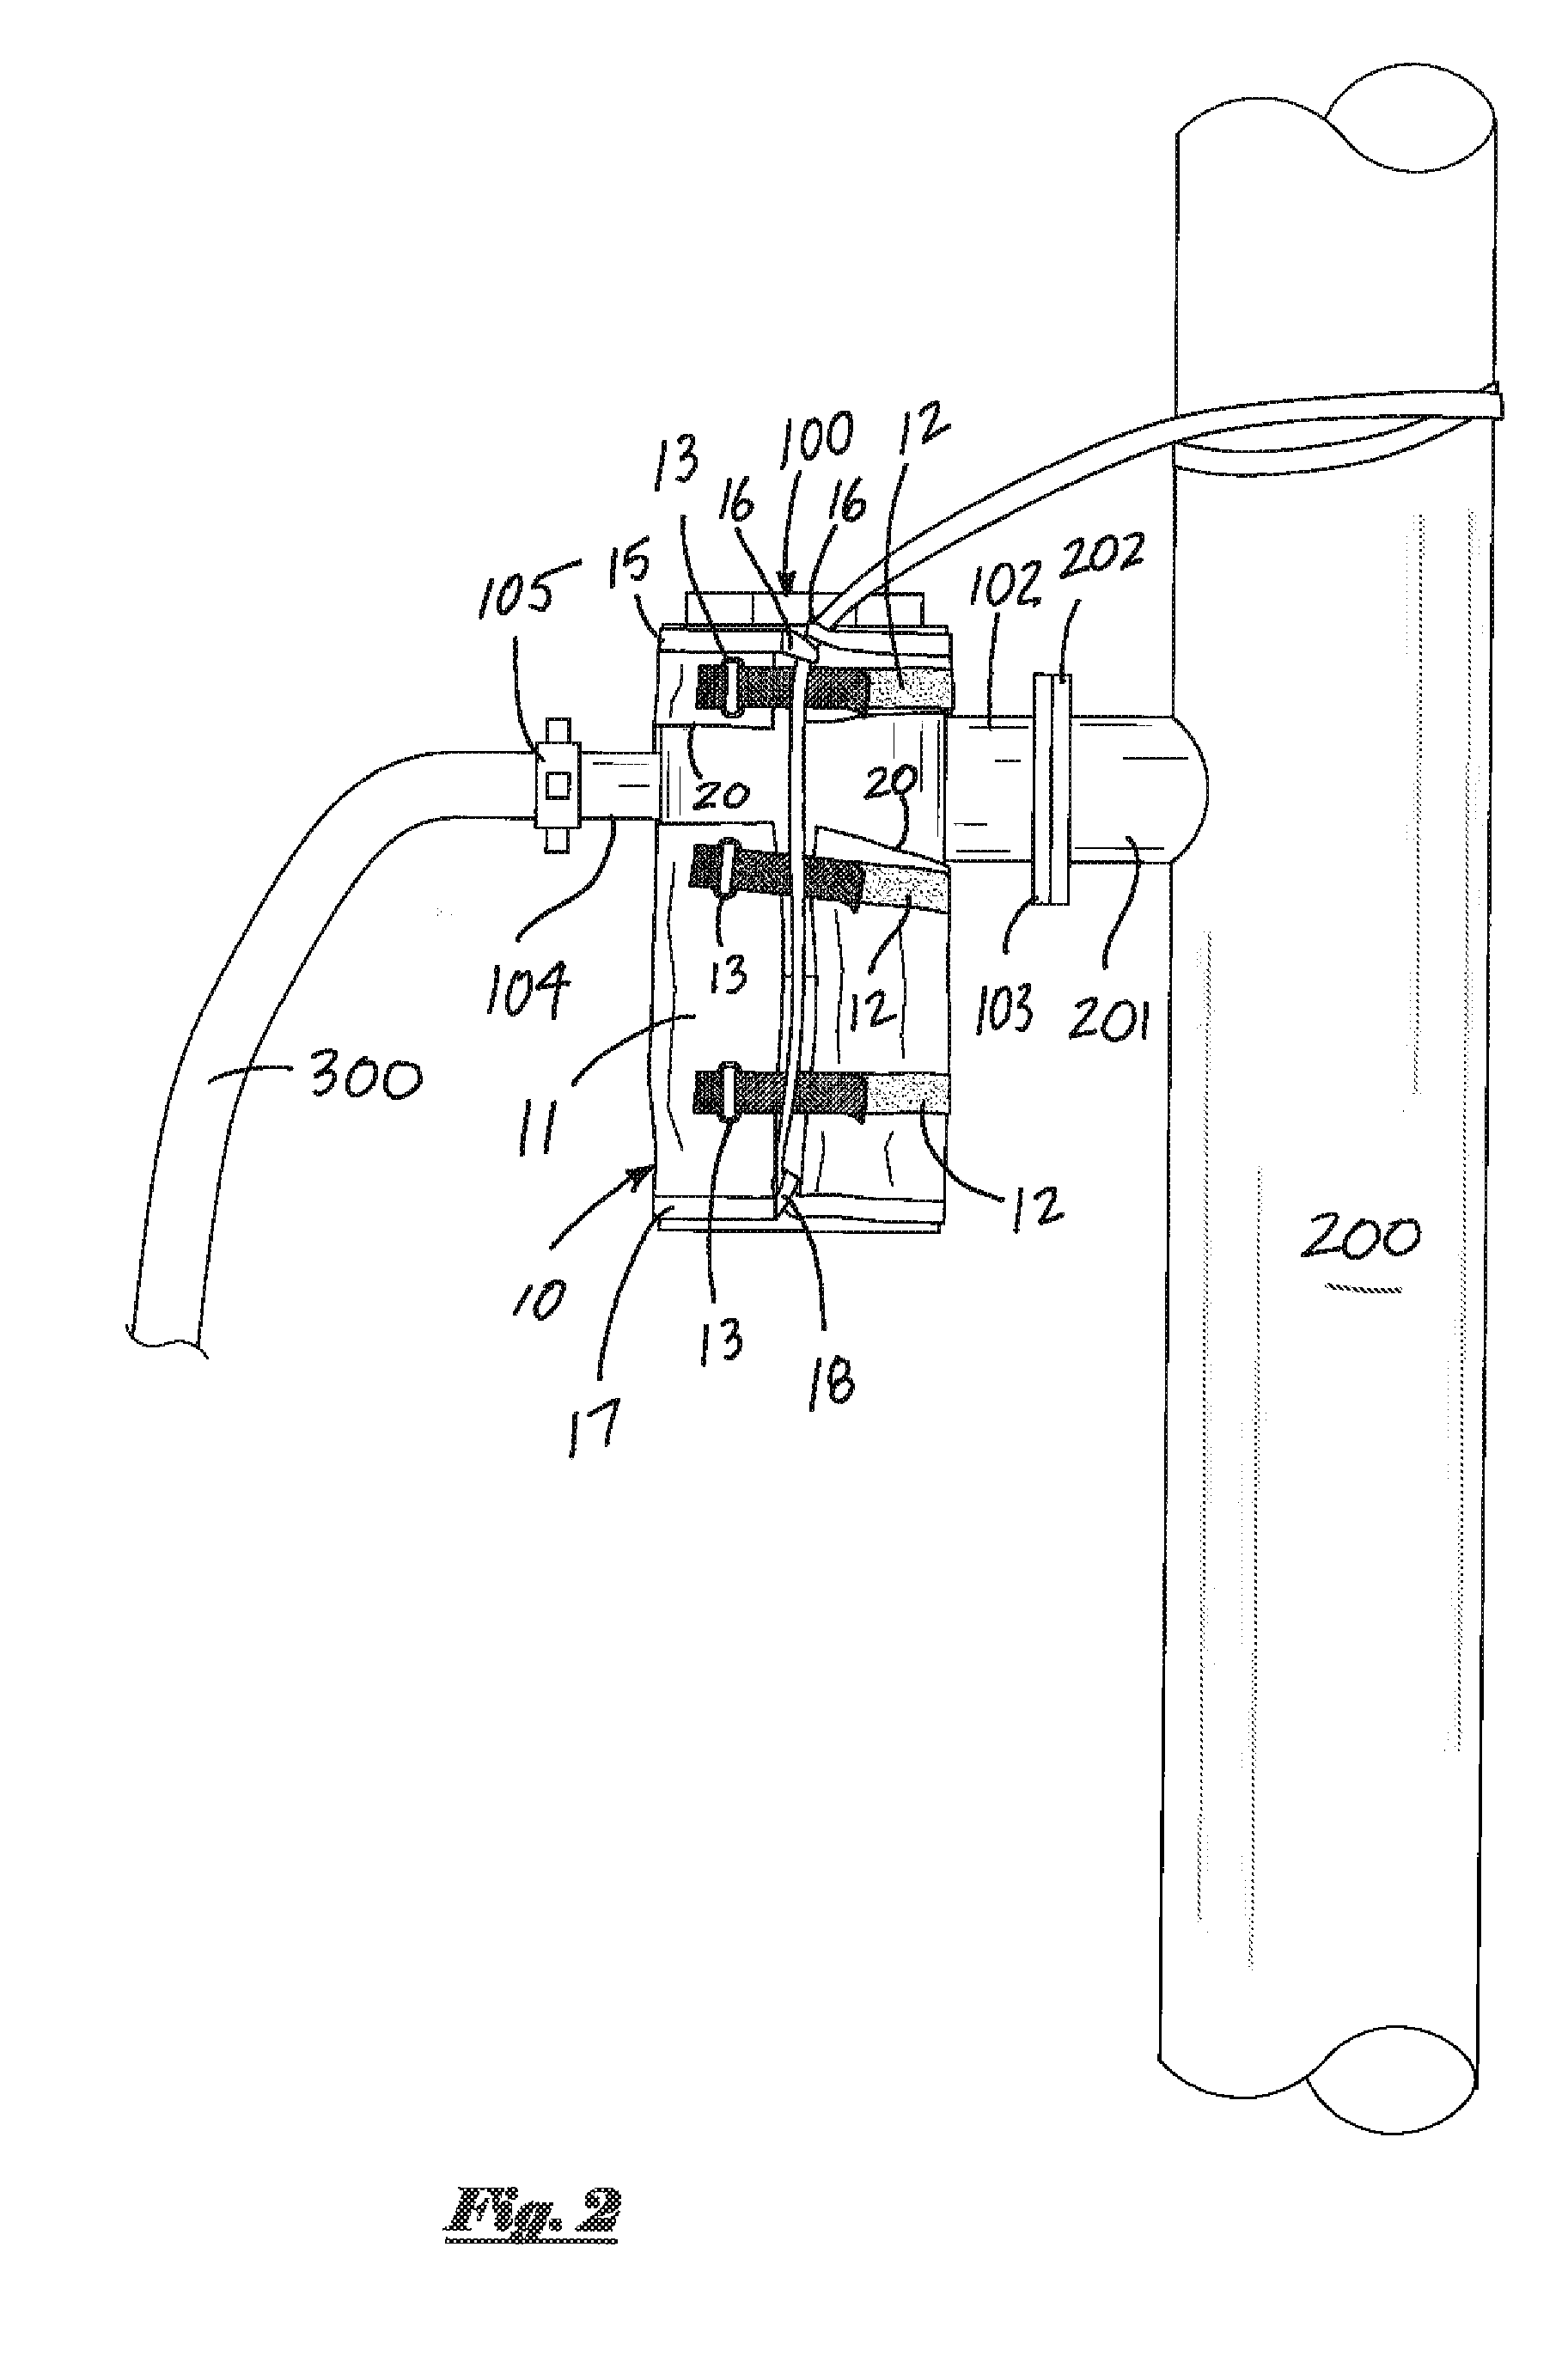 Method and Apparatus for Retaining Elevated Objects